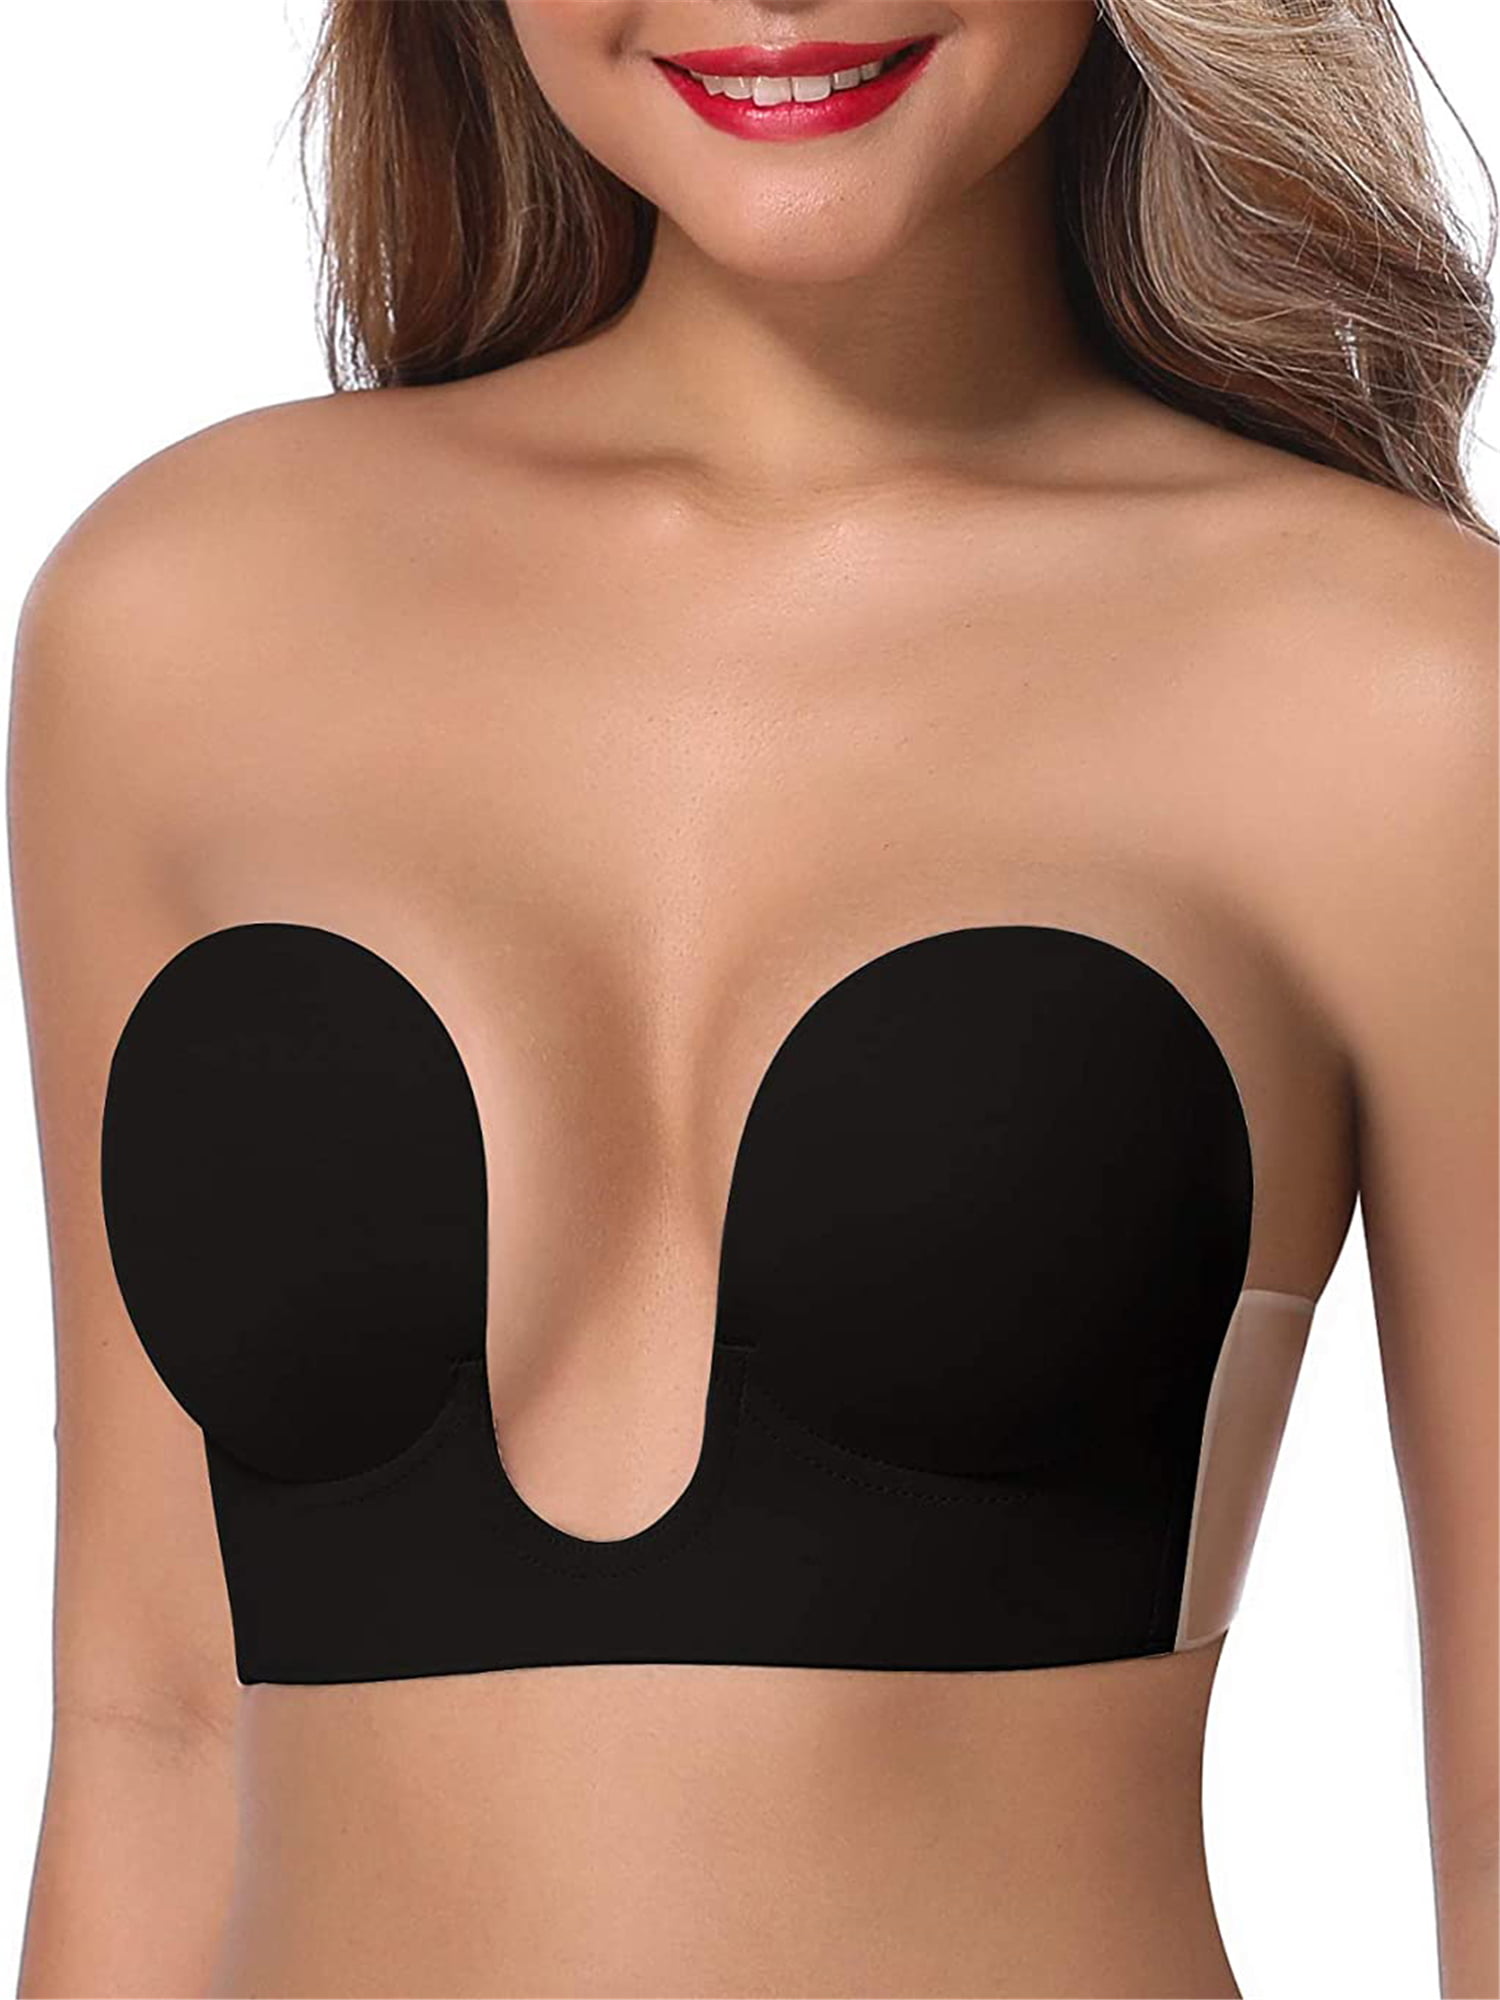 Bras & Bra Sets - Push-up Strapless Plunge Bra Invisible Backless Sticky  Bras - C CUP was listed for R99.00 on 31 Jul at 20:20 by 99 Rands in Durban  (ID:586489948)